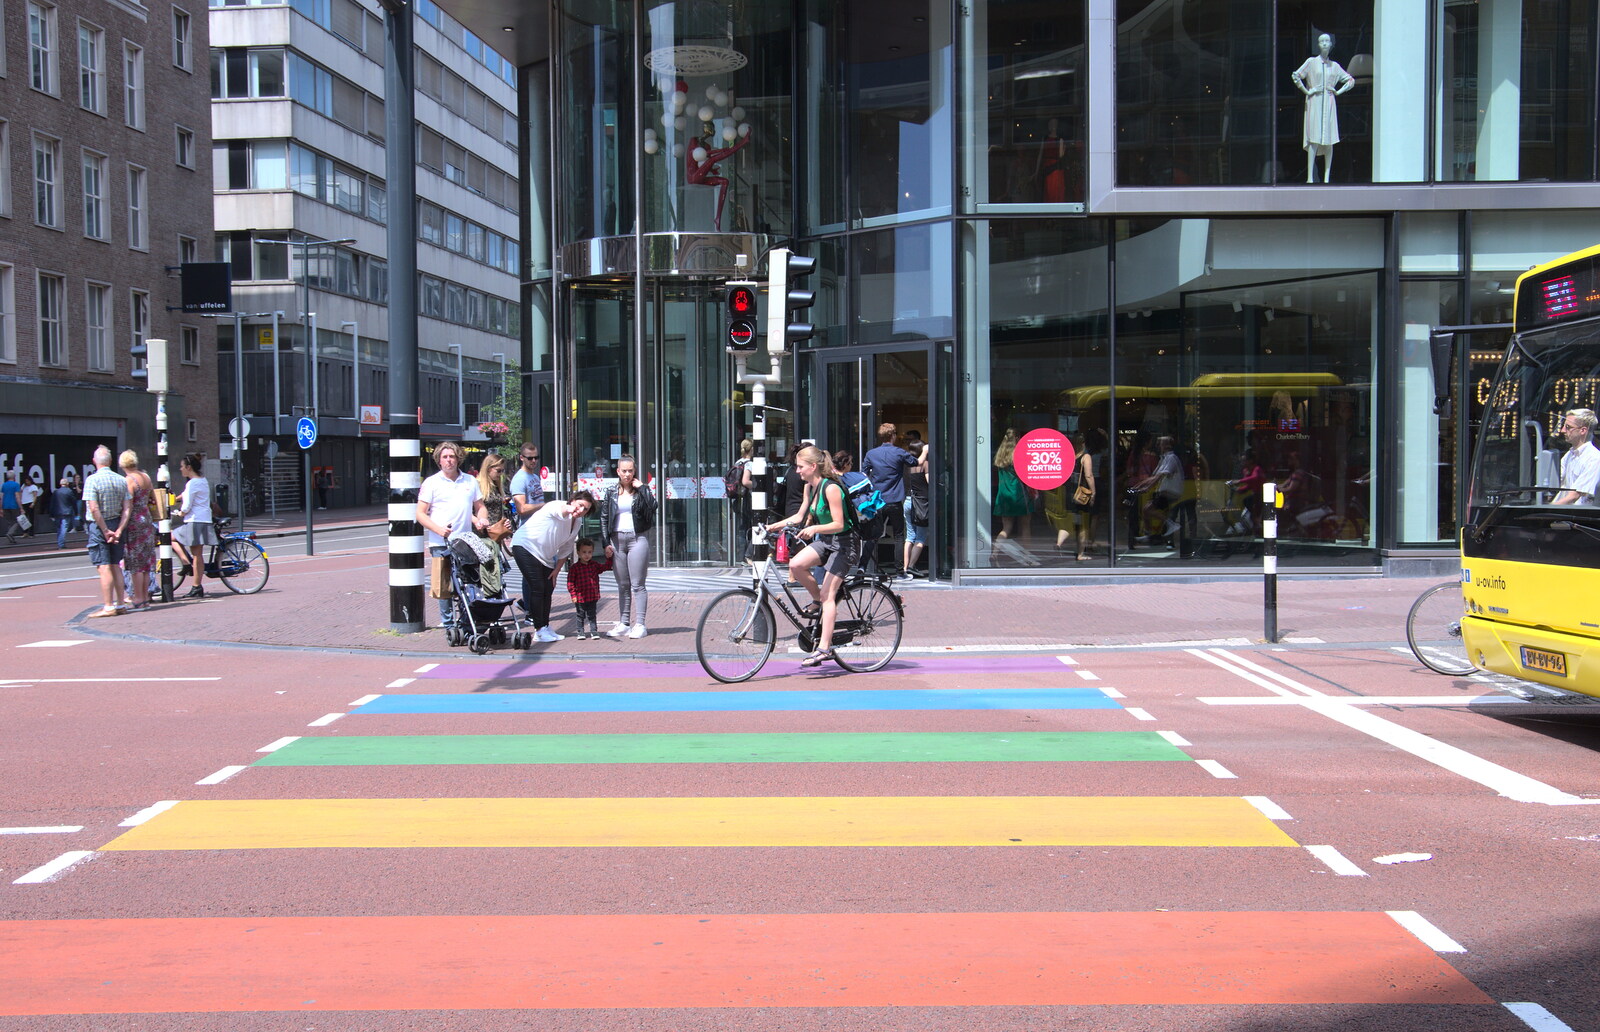 The Rainbow Crossing by Miffy's Traffic Light from A Postcard from Utrecht, Nederlands - 10th June 2018